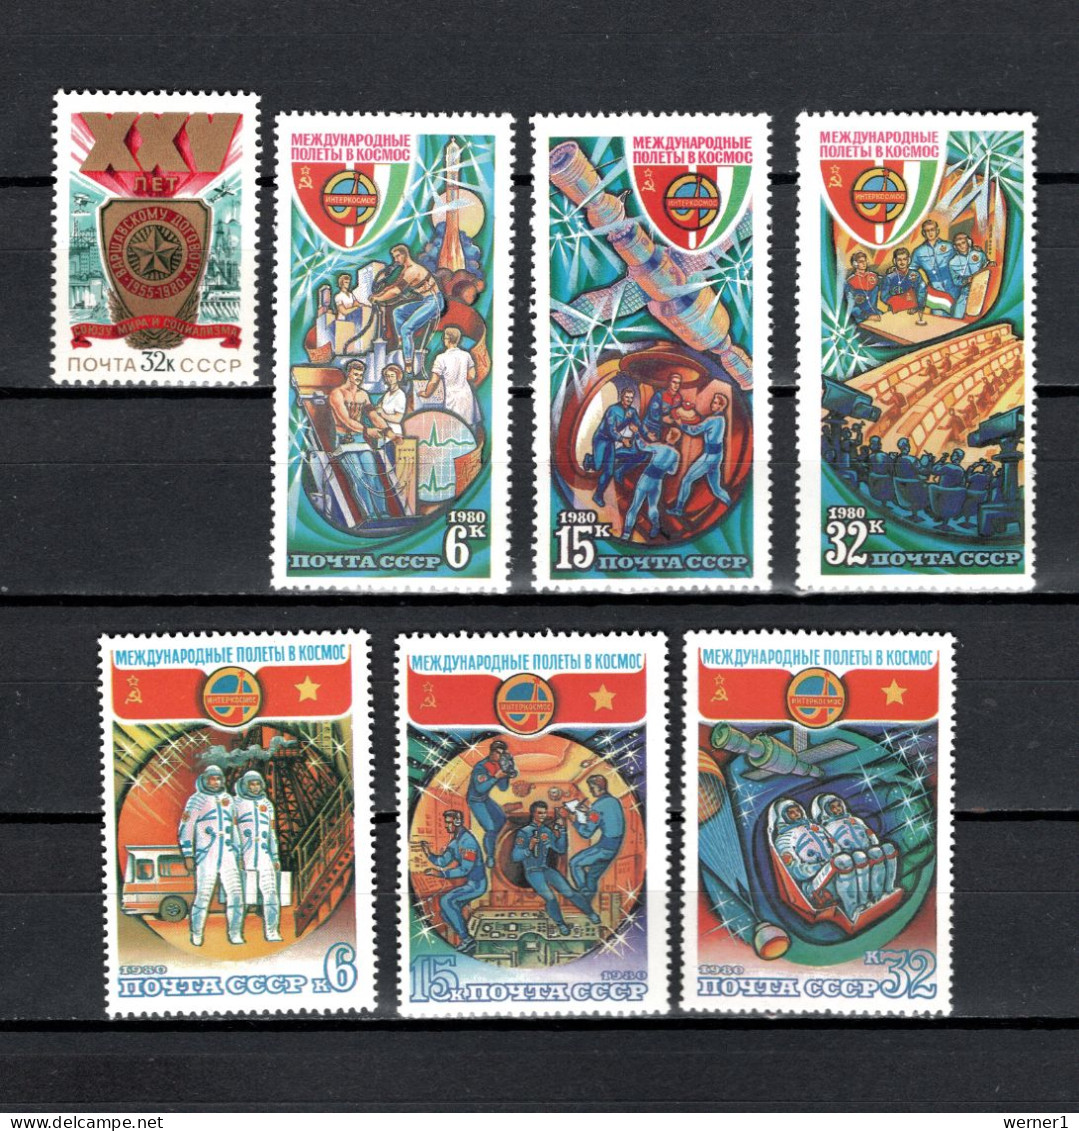 USSR Russia 1980 Space, Warsaw Treaty, Interkosmos 7 Stamps MNH - Russia & USSR